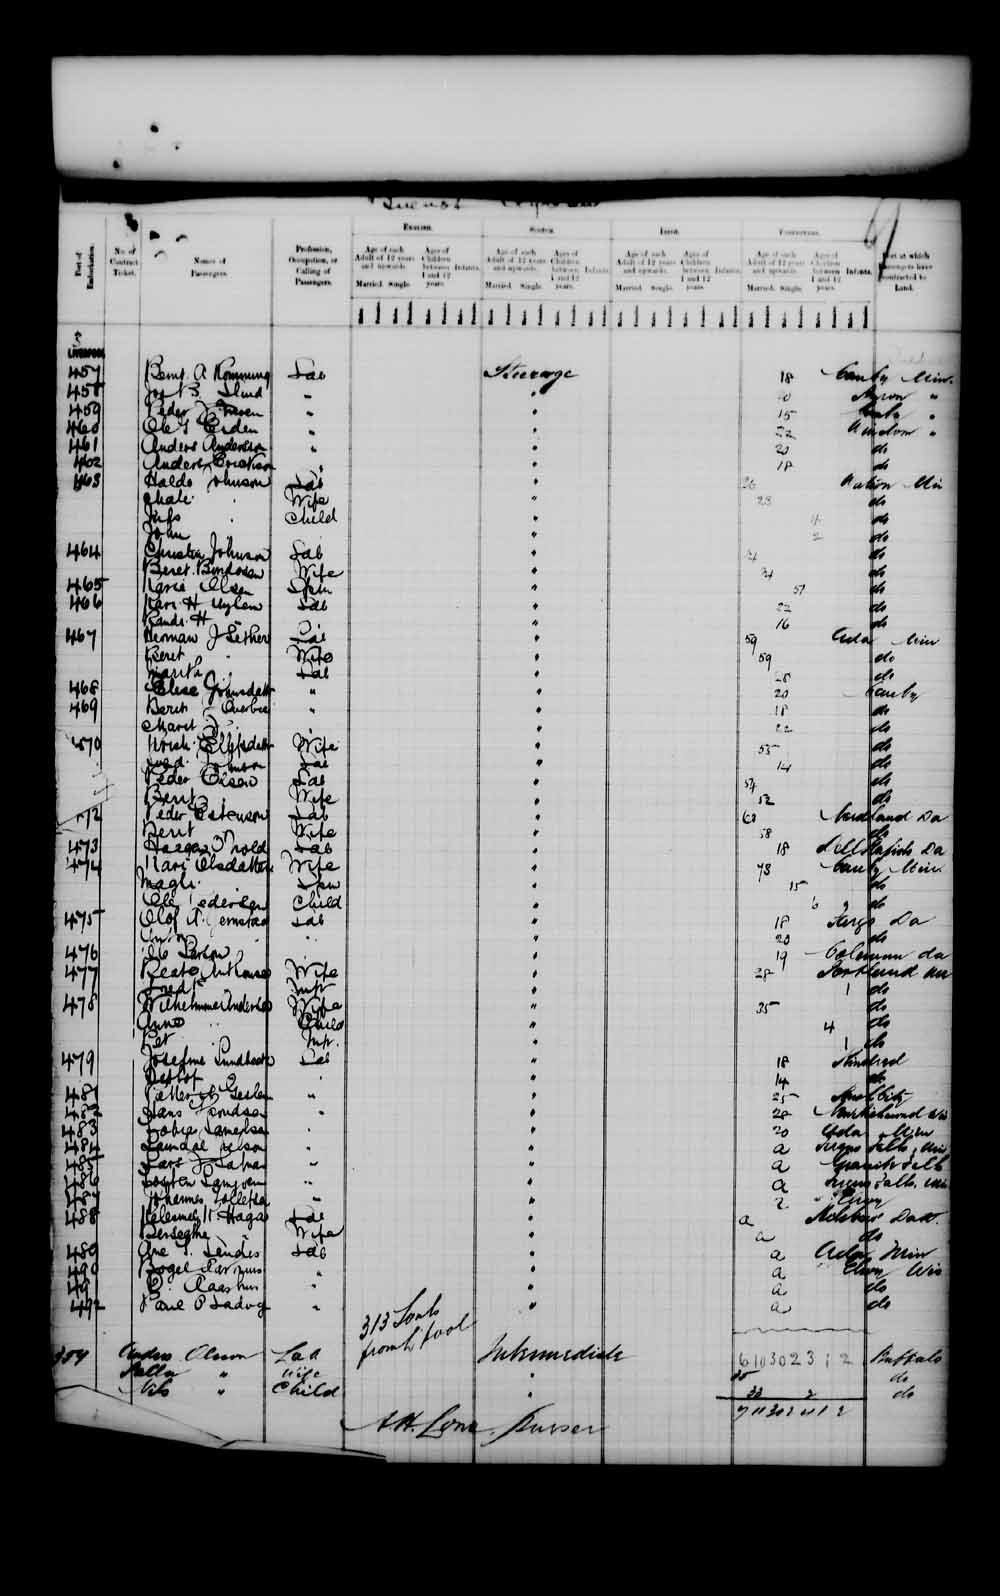 Digitized page of Passenger Lists for Image No.: e003542780